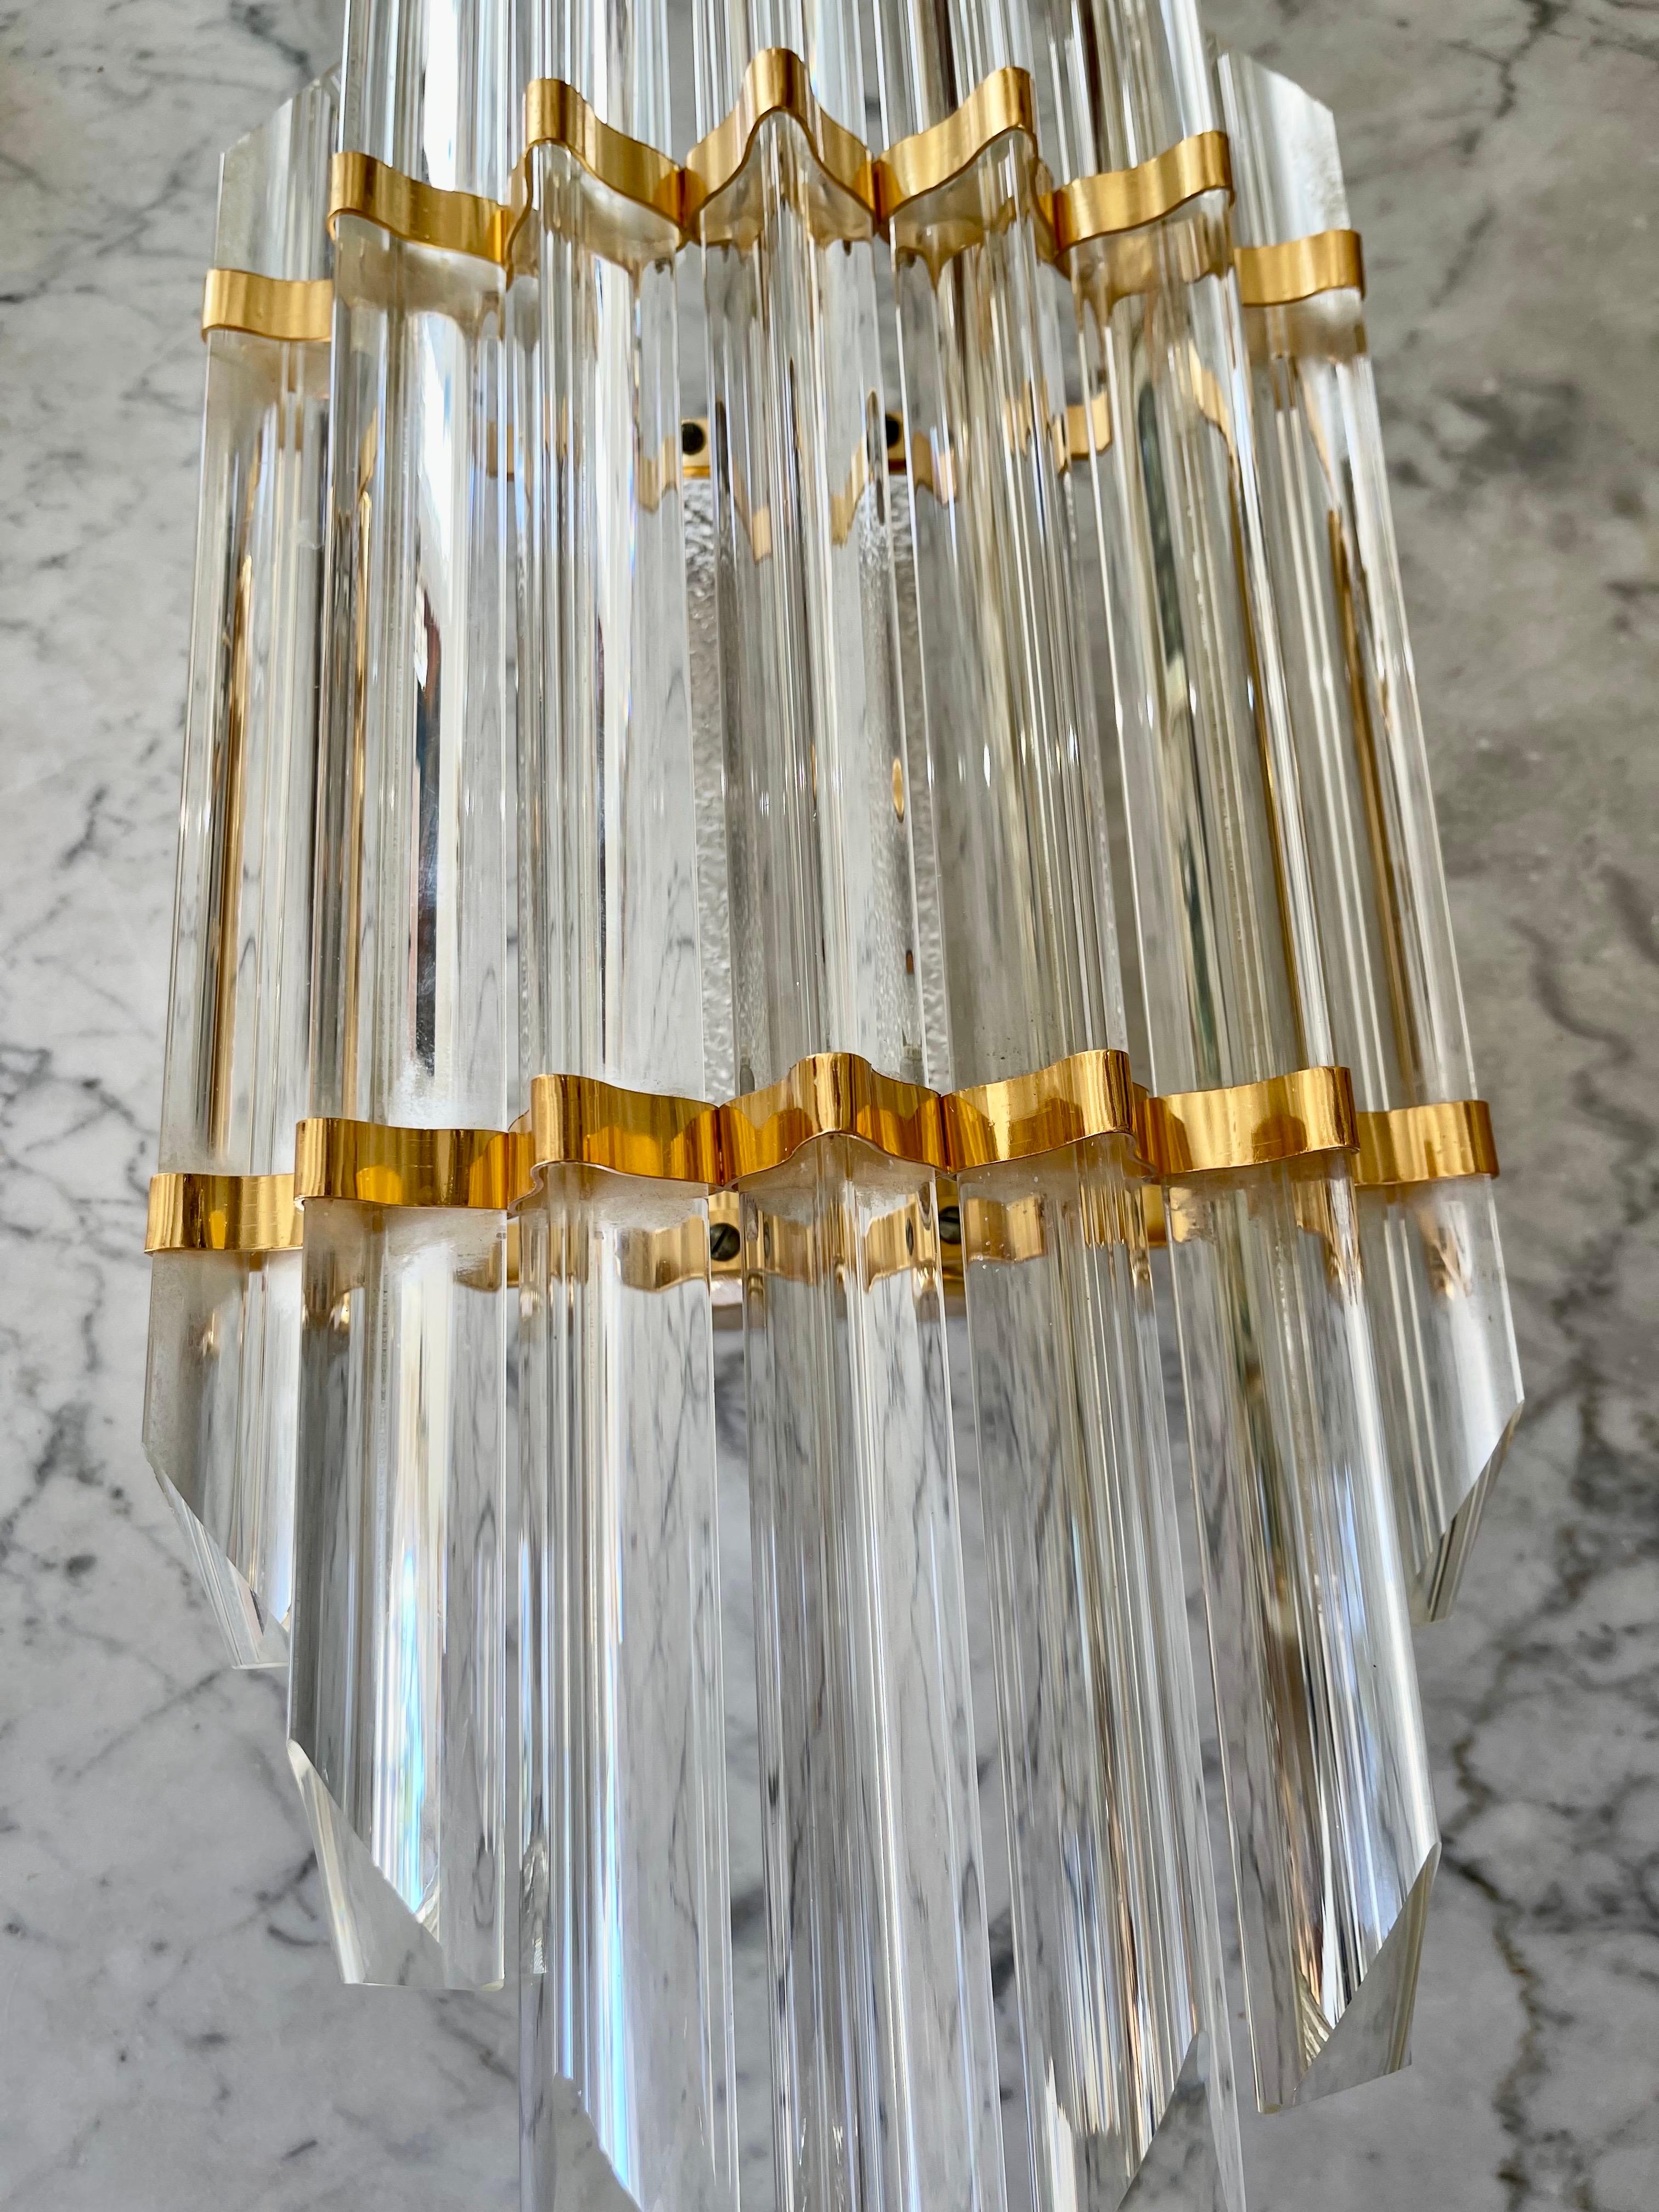 Venini wall lamp in Murano glass with iridium glass. The design and the quality of the glass make this piece the best in design.
This pair of sconces is in good condition.
Venini is an Italian company known for its high quality handcrafted lighting.